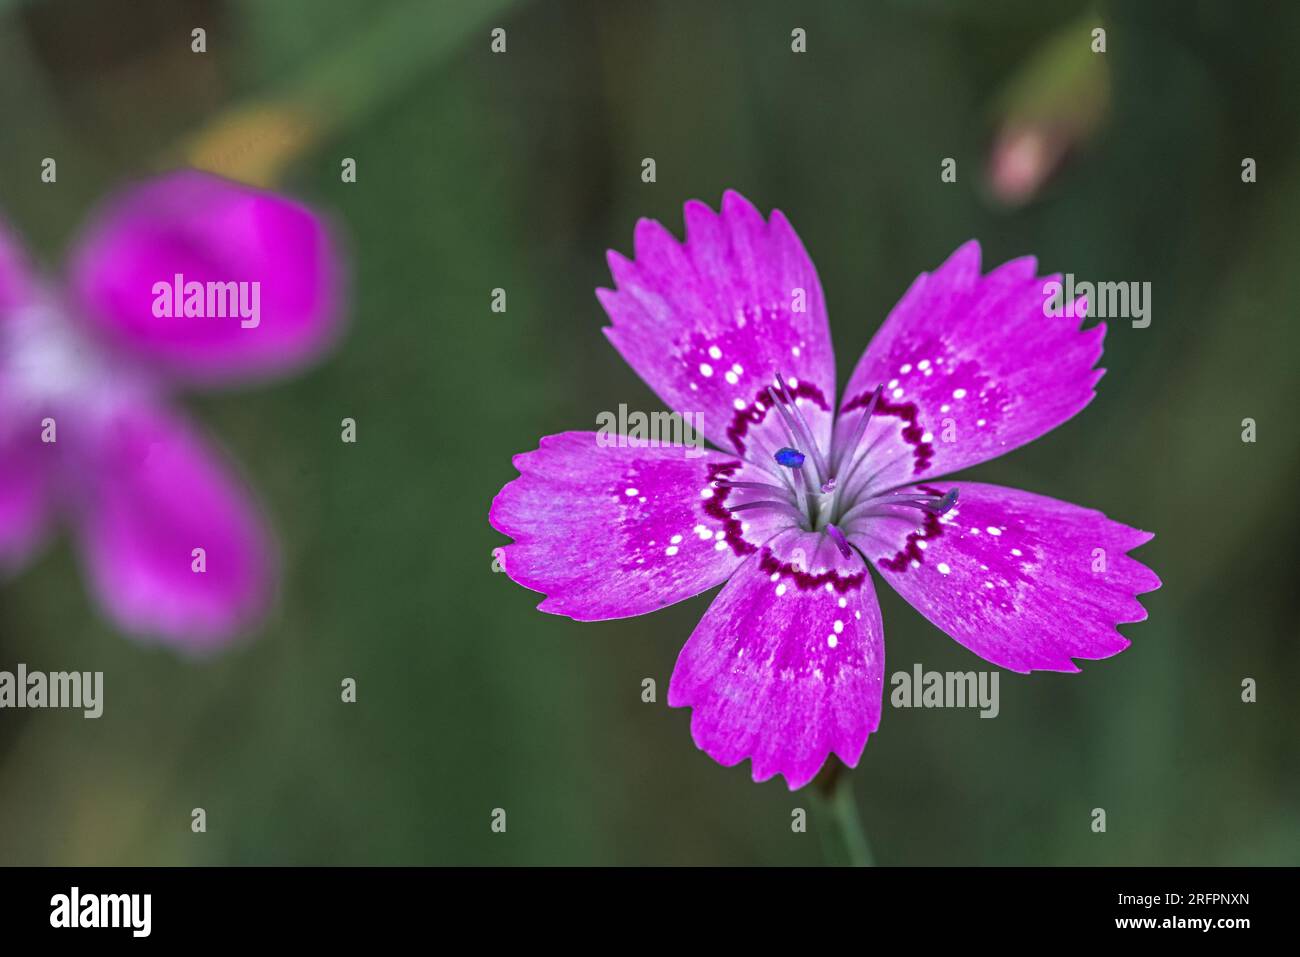 Detailed closeup on the bright purple flowers of a Carnation meadow Flower, Dianthus deltoides Stock Photo